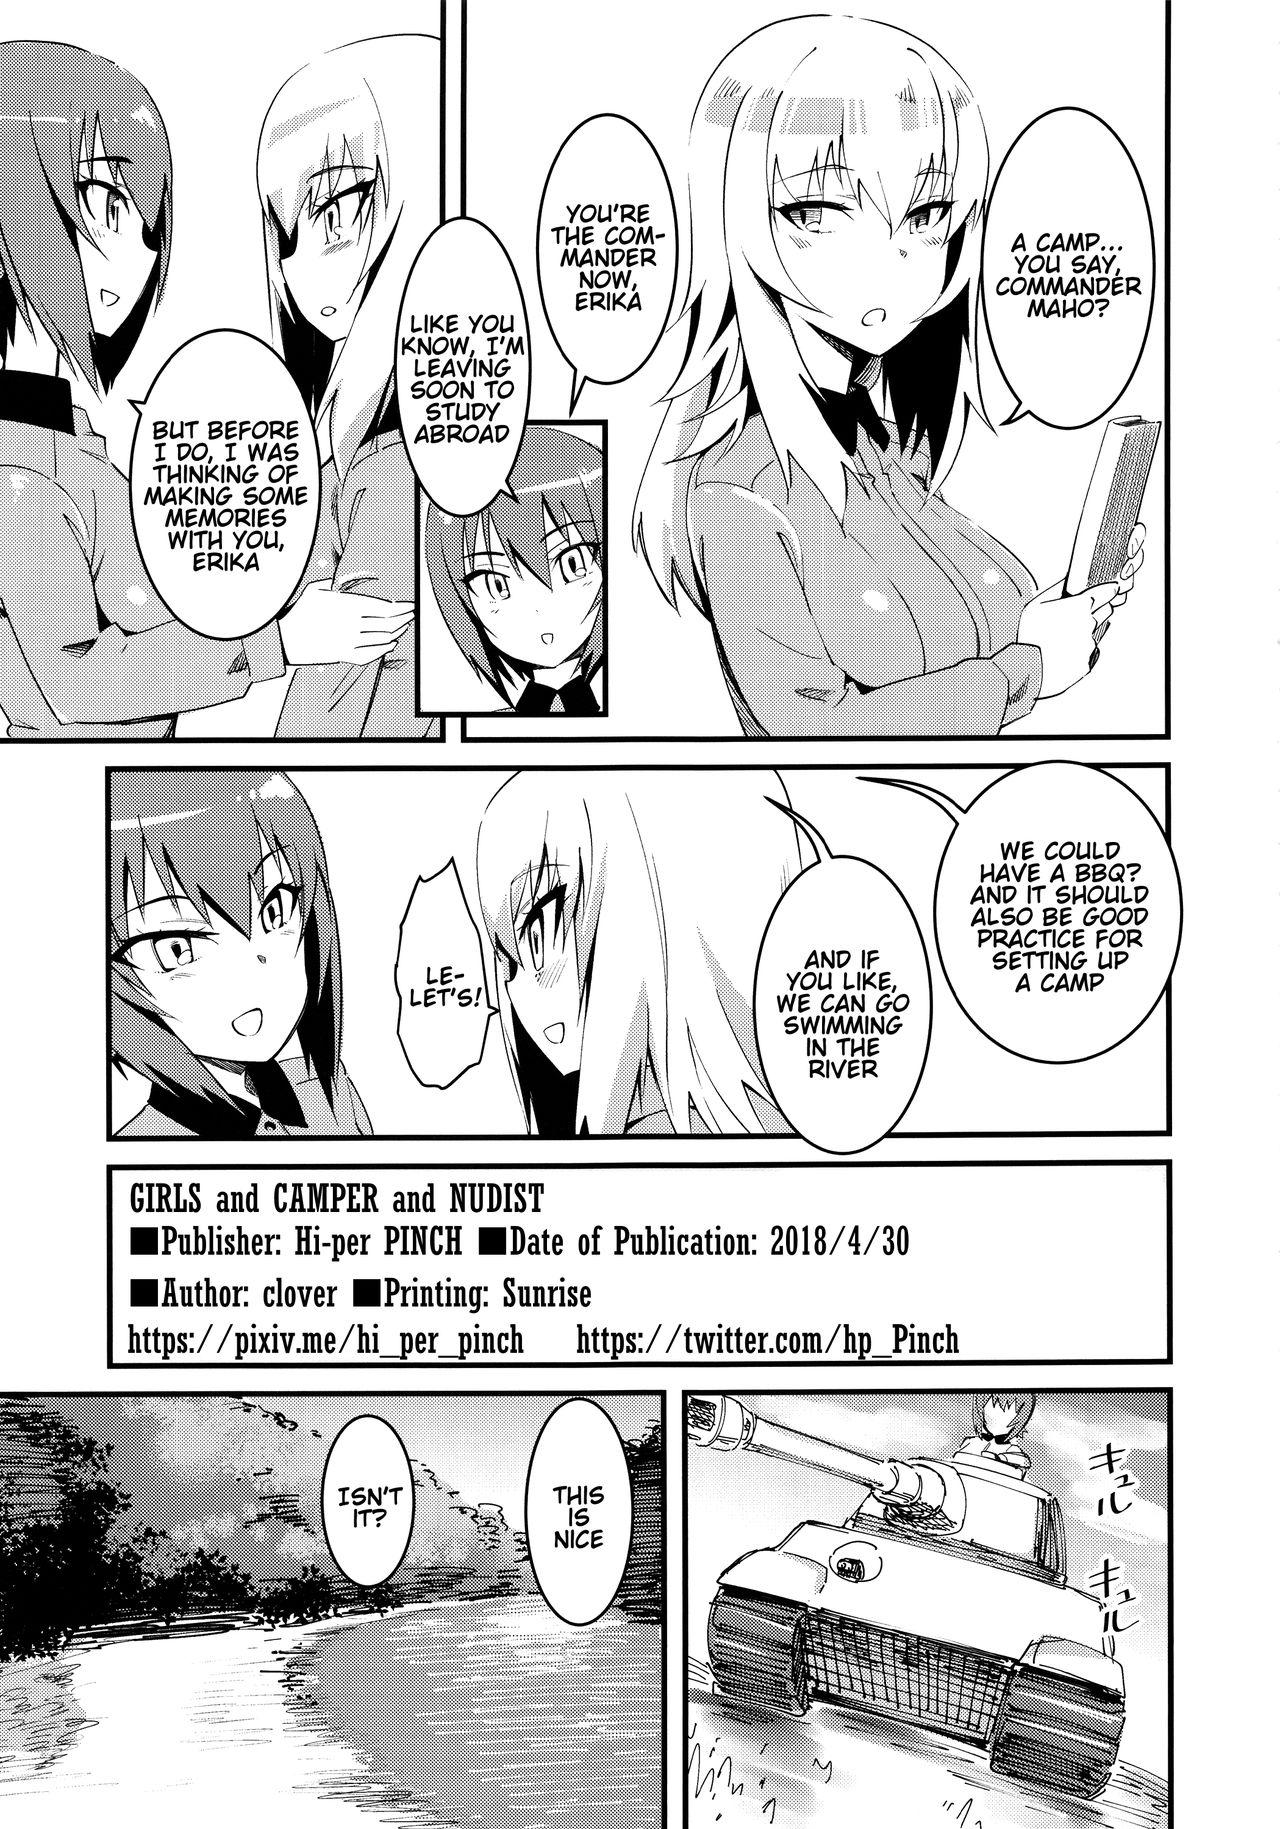 Lesbians GIRLS and CAMPER and NUDIST - Girls und panzer Bisexual - Page 2